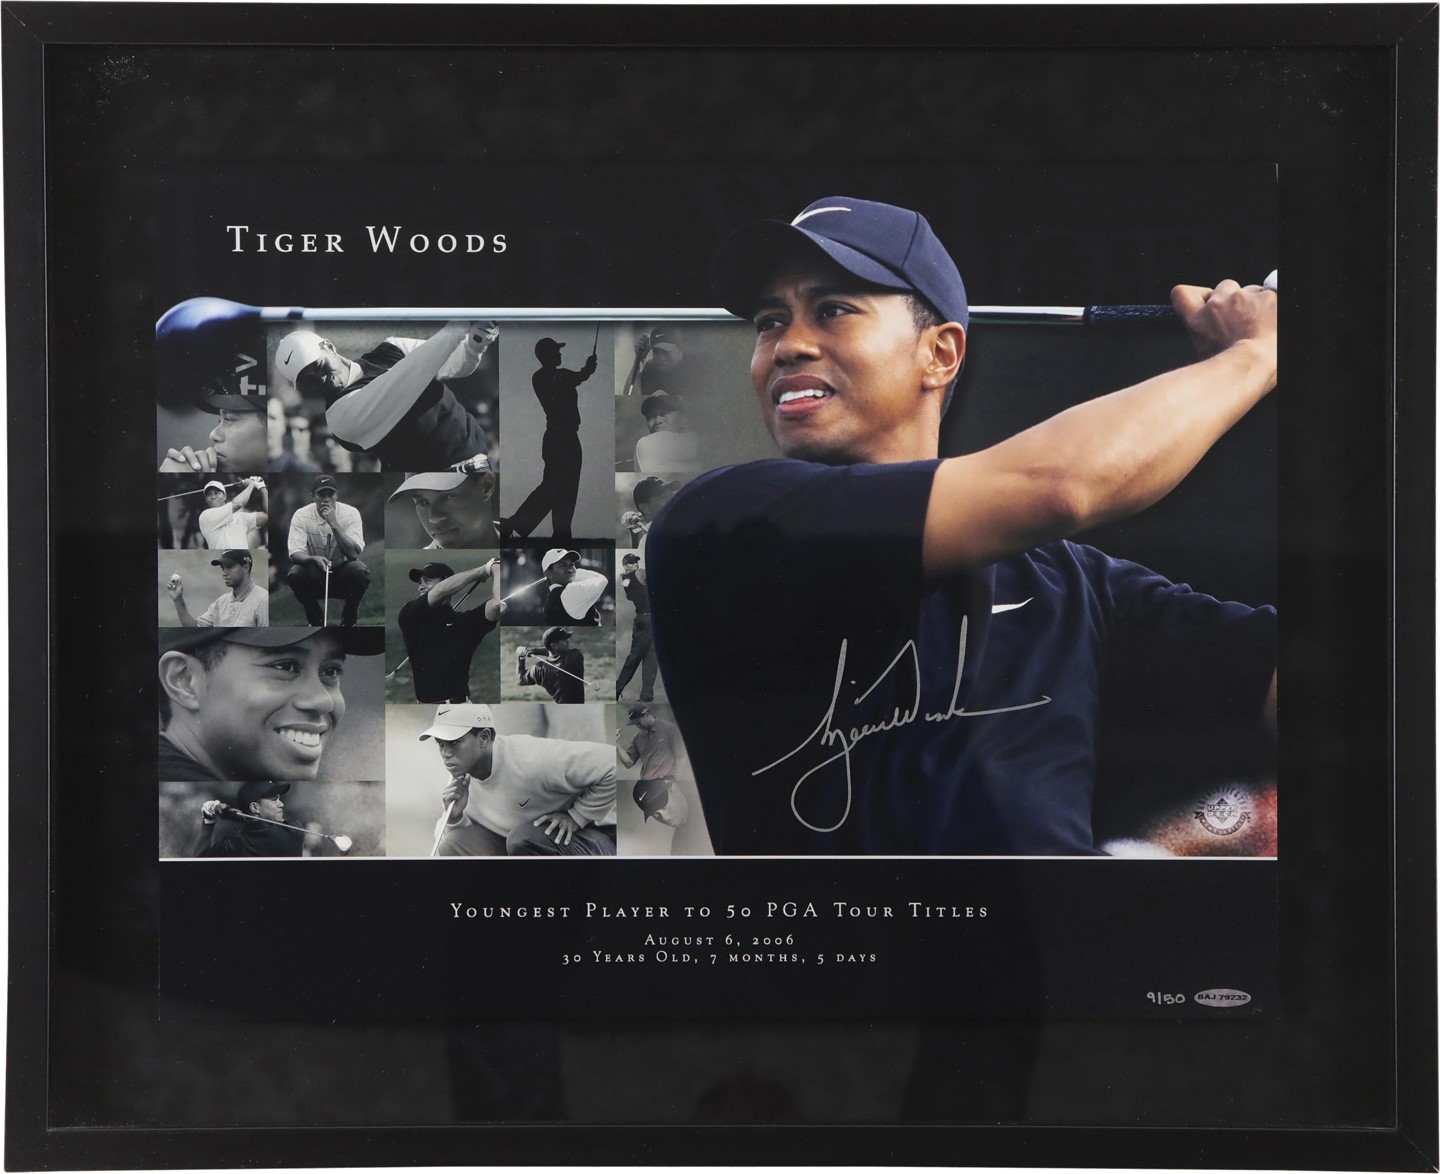 Olympics and All Sports - Tiger Woods "Youngest Player to 50 PGA Tour Titles" Limited Edition Signed Photograph LE 9/50 (UDA)